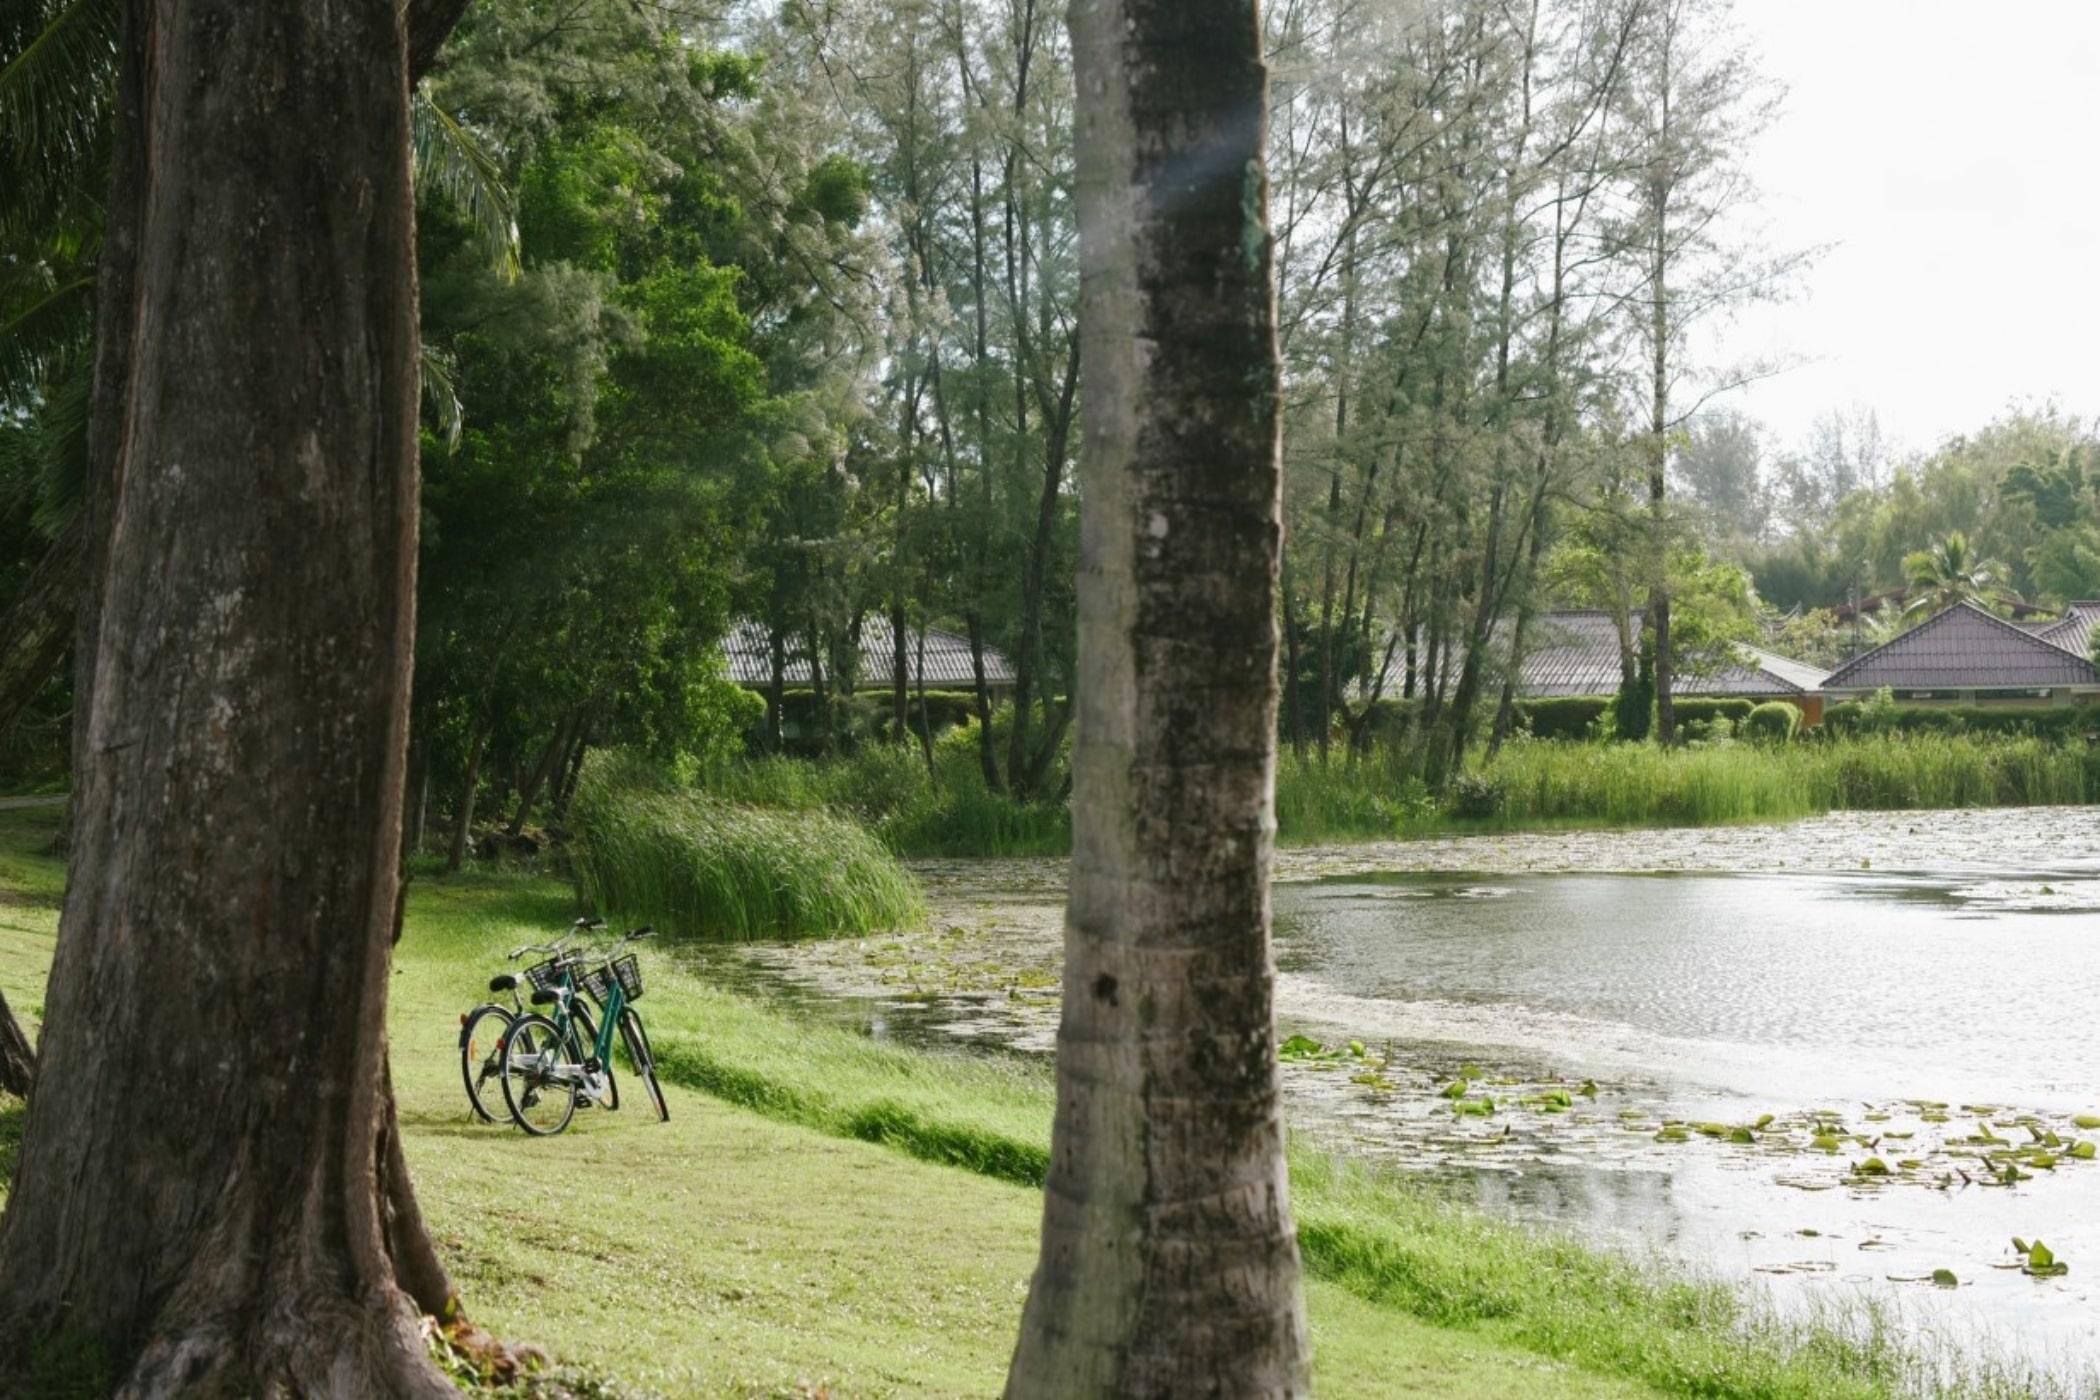 bicycles next to a lake in nature